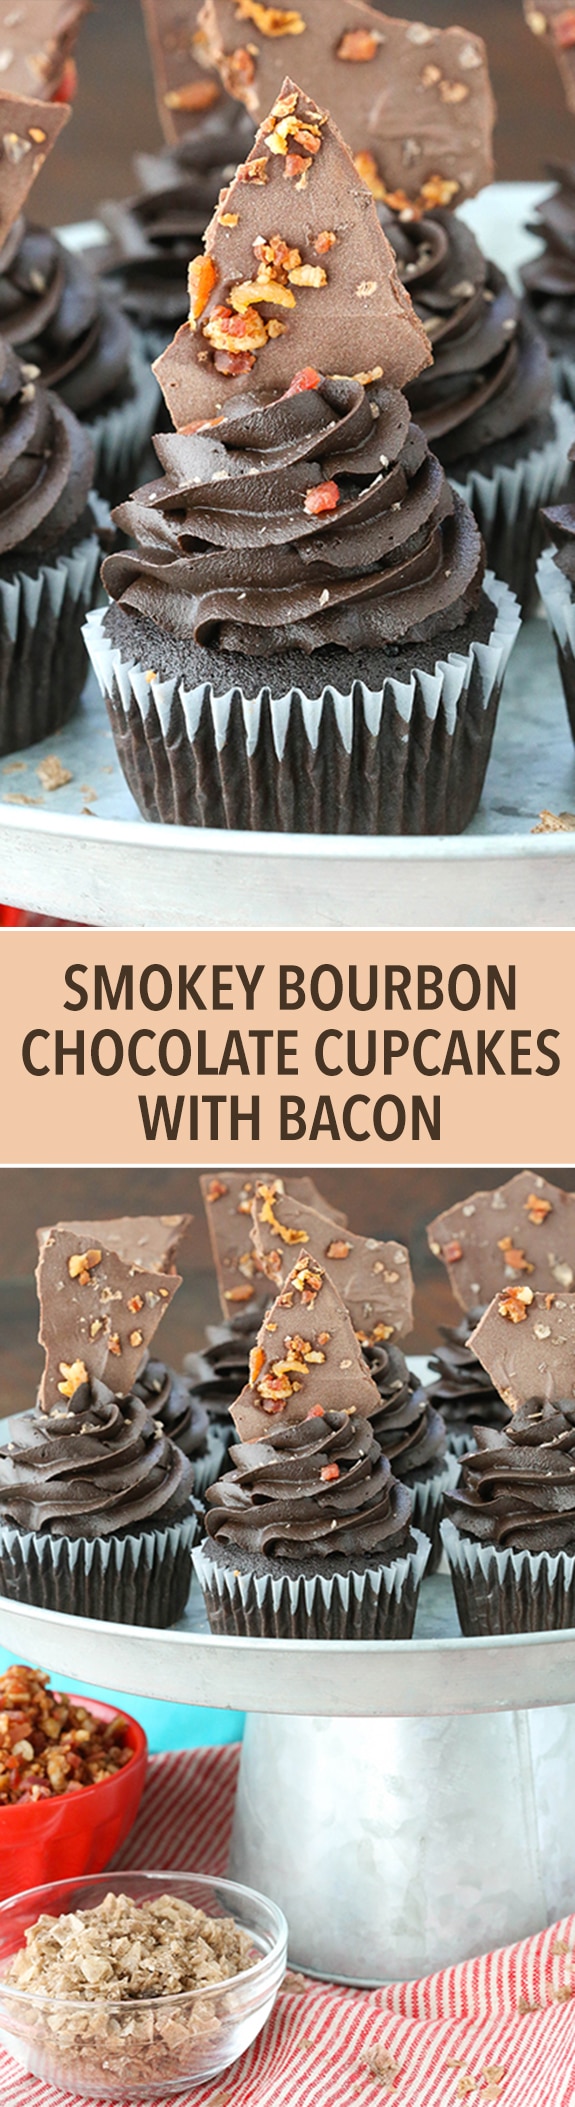 Smokey Bourbon Chocolate Cupcakes with Bacon - dark chocolate cupcakes spiked with bourbon in the cupcake and frosting! Topped with smokey salted bacon chocolate bark! SO amazing!